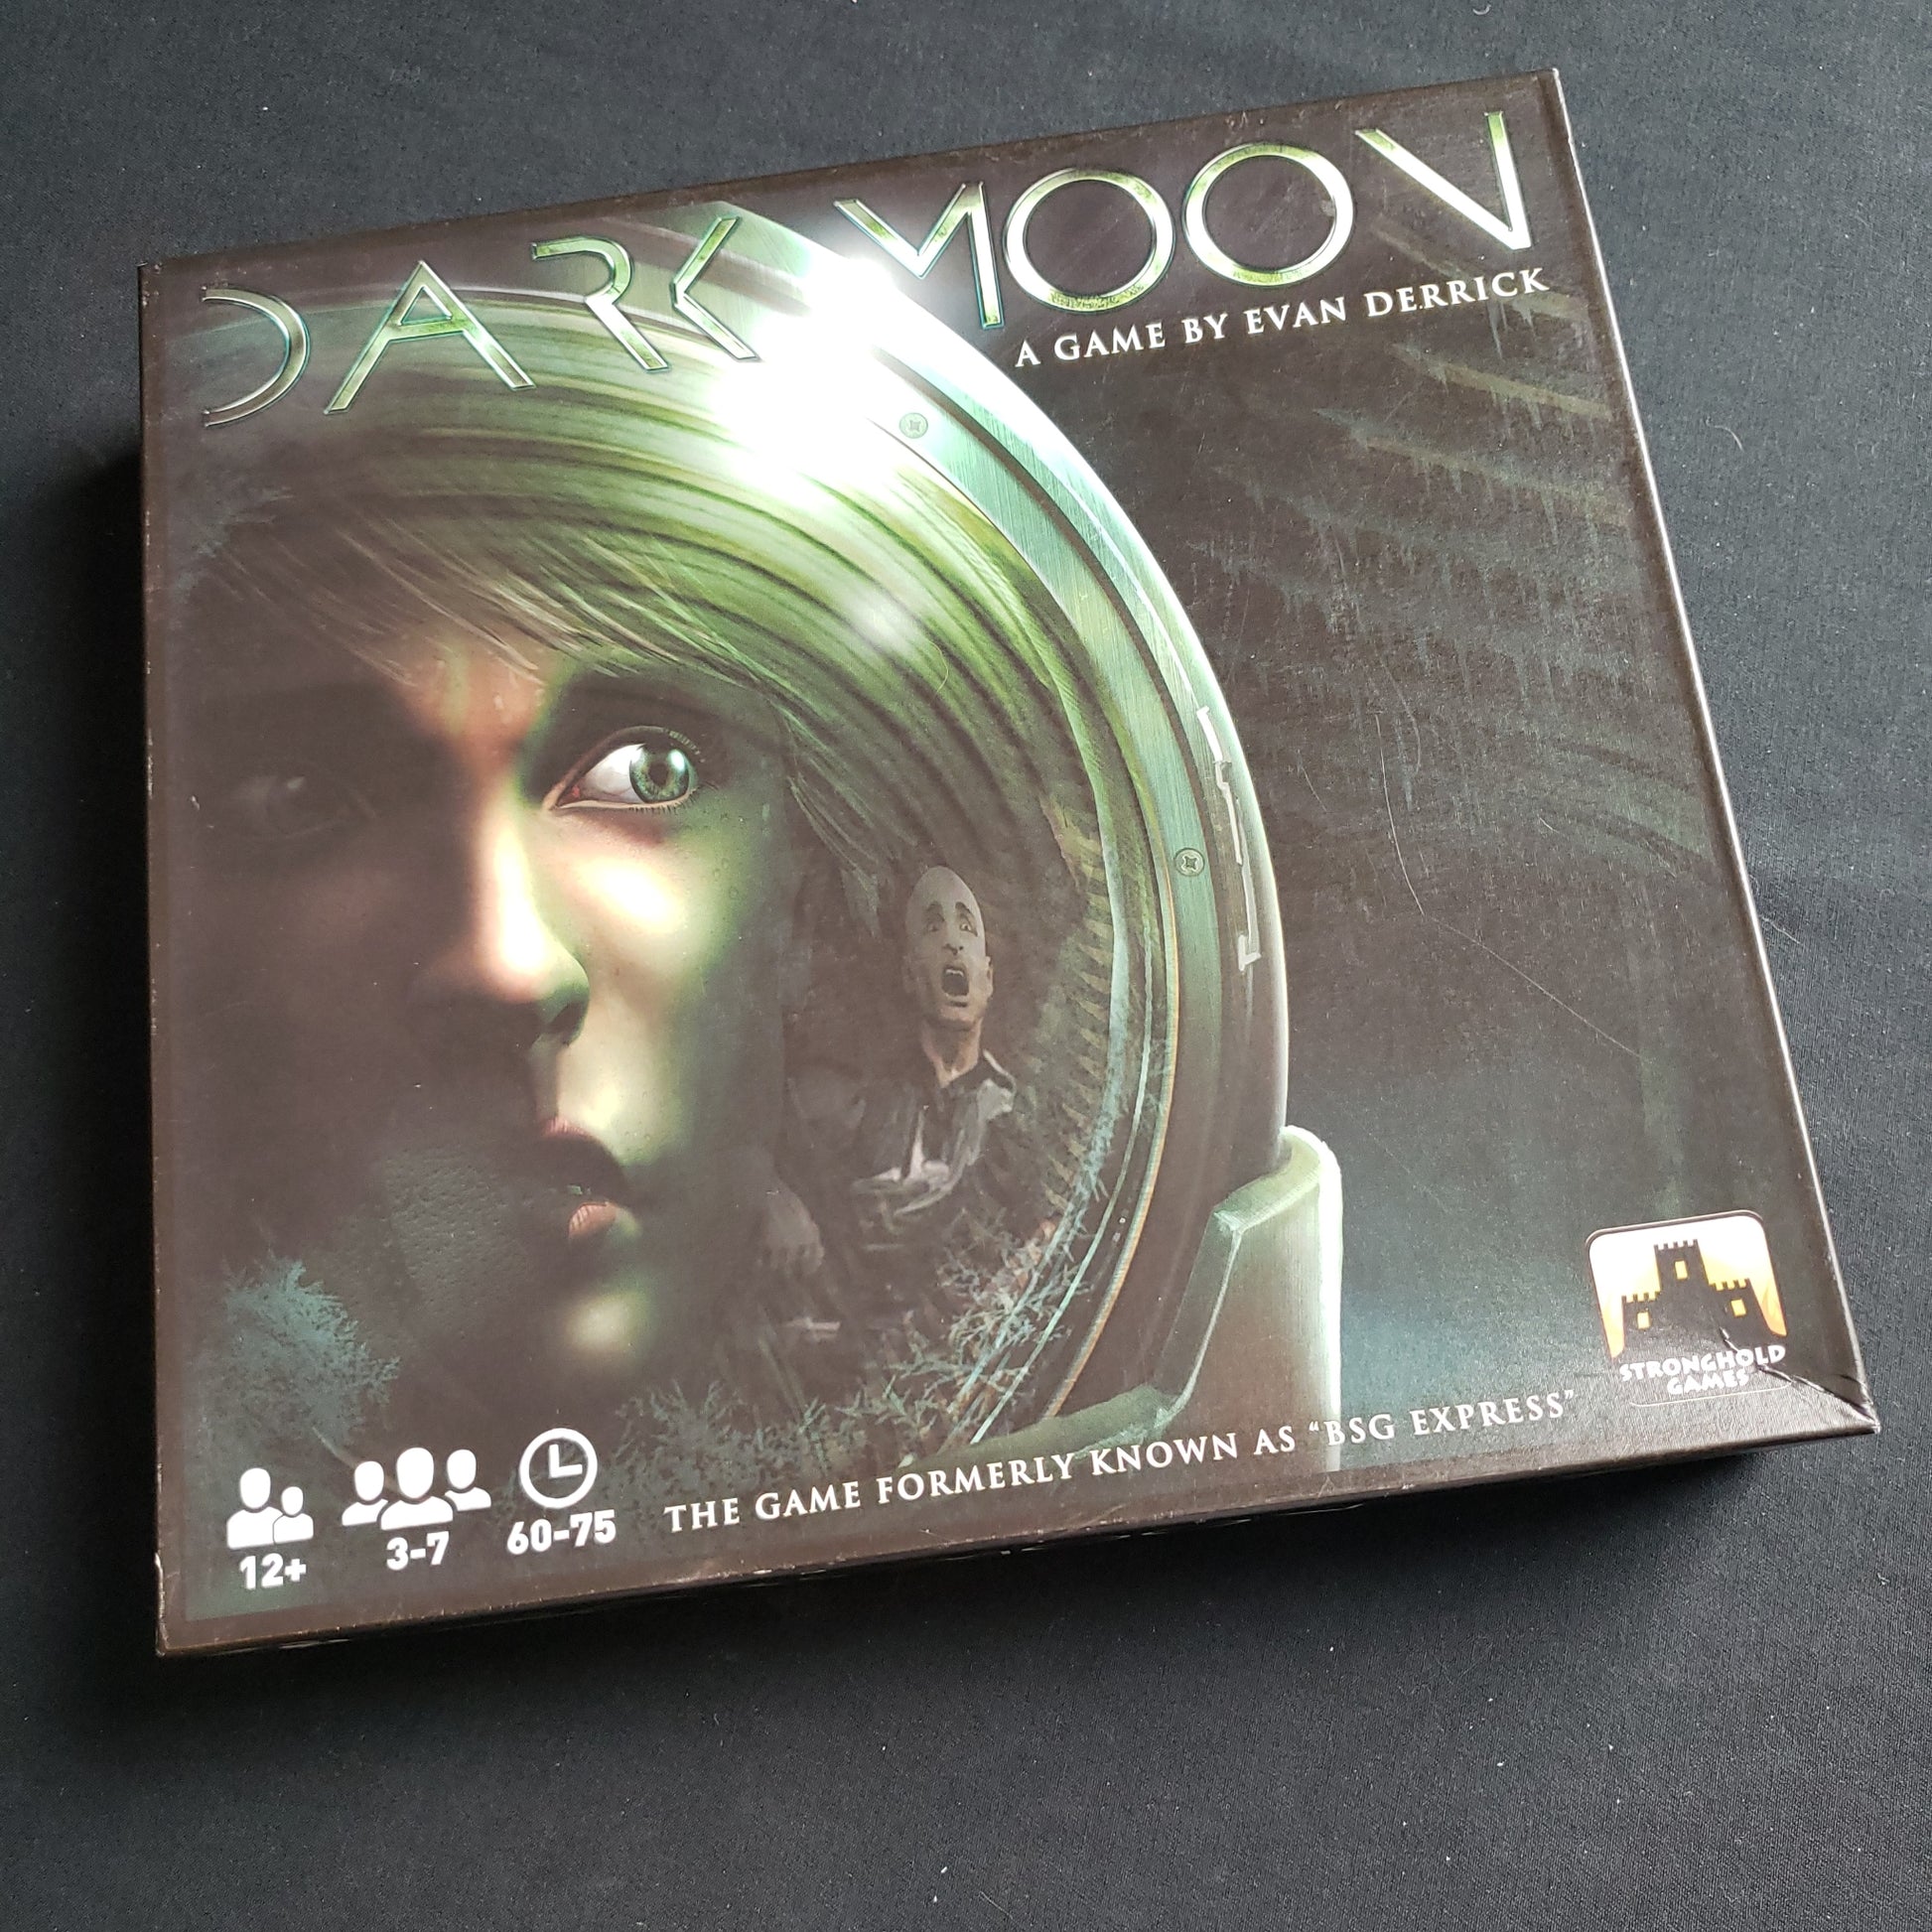 Image shows the front cover of the box of the Dark Moon board game